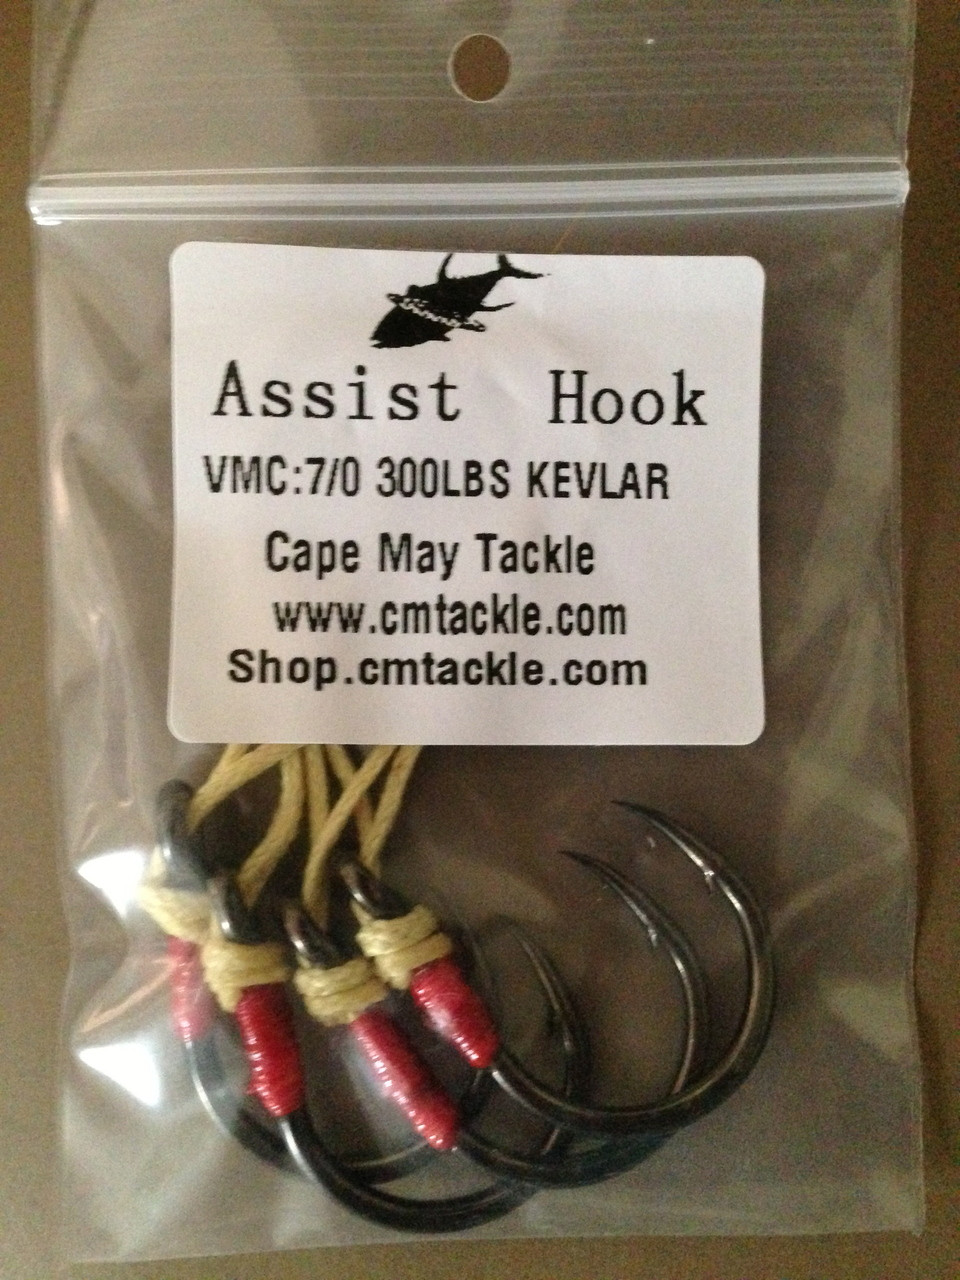 Hand served VMC 7/0 Assist hooks on USA made Kevlar Cord, 4 pcs per package.